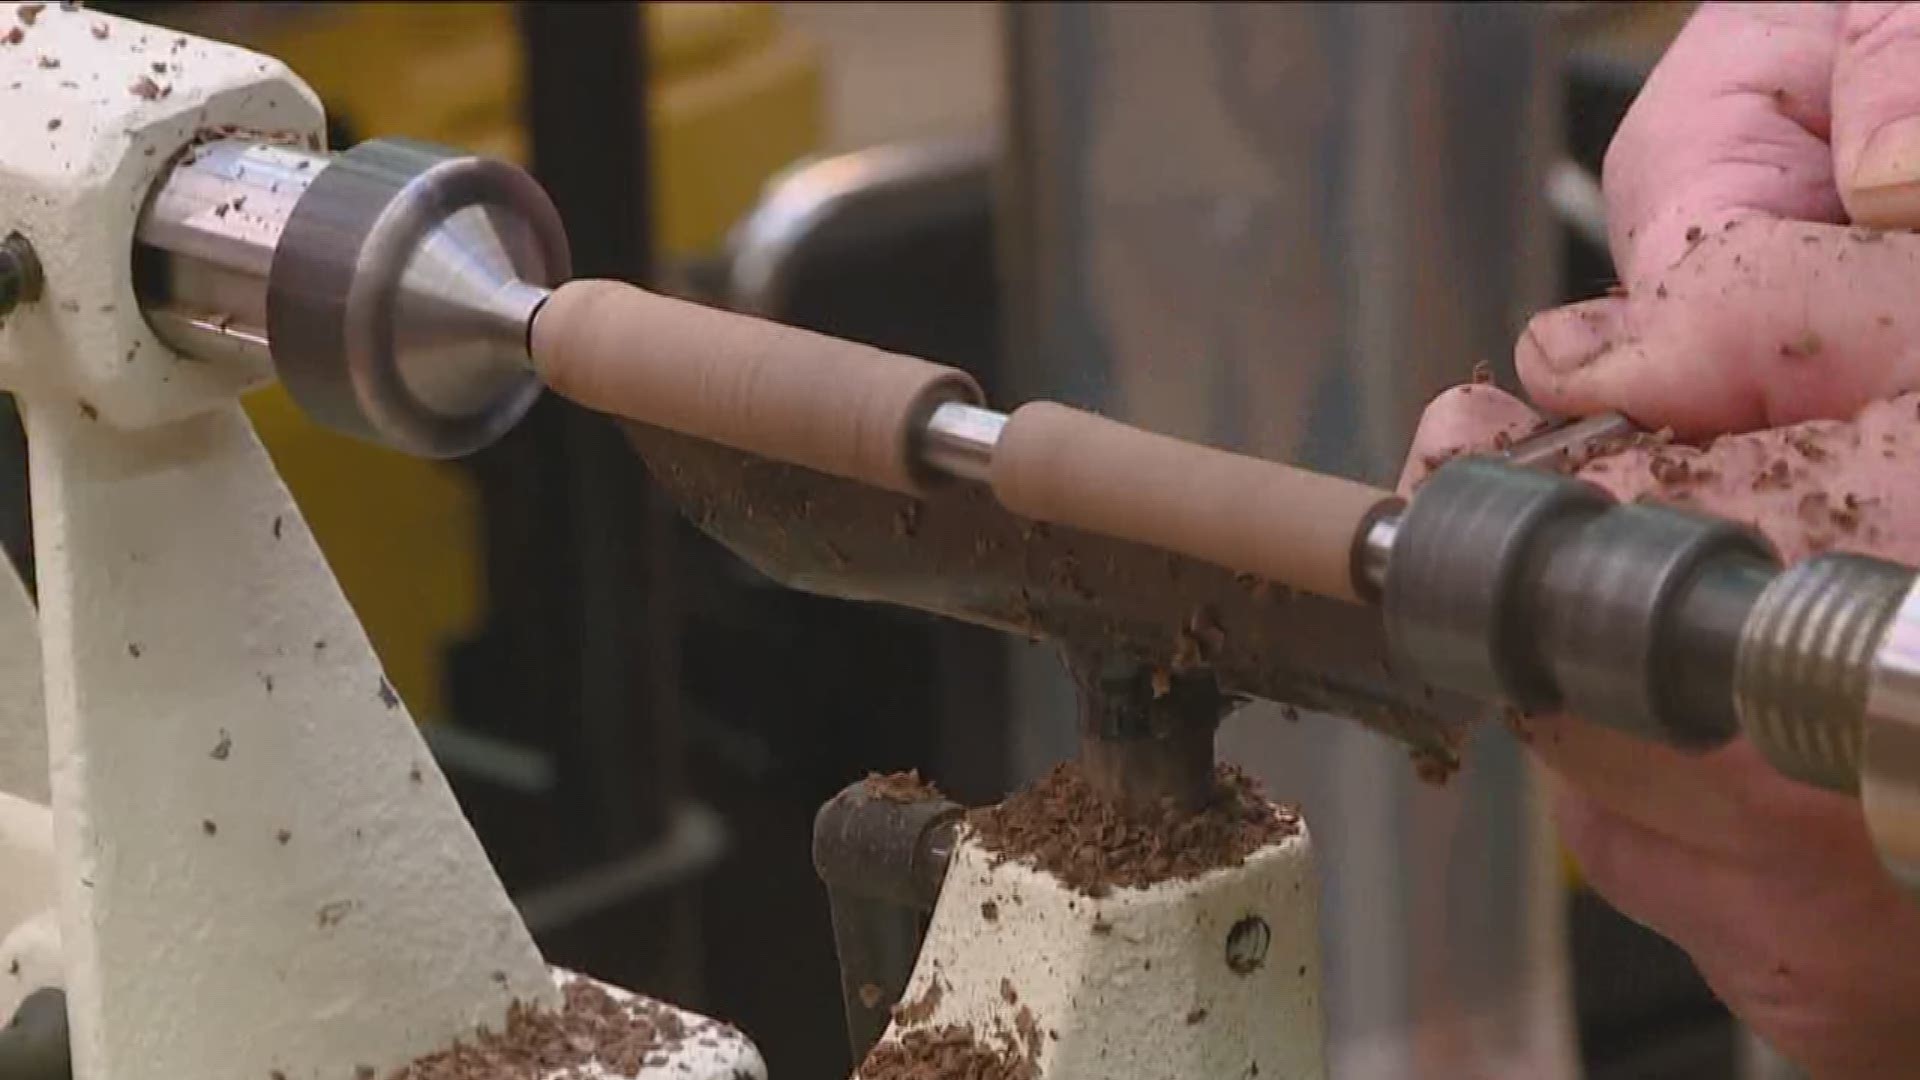 The woodworkers expect to craft over 1,400 pens and get them to American troops during the holidays.